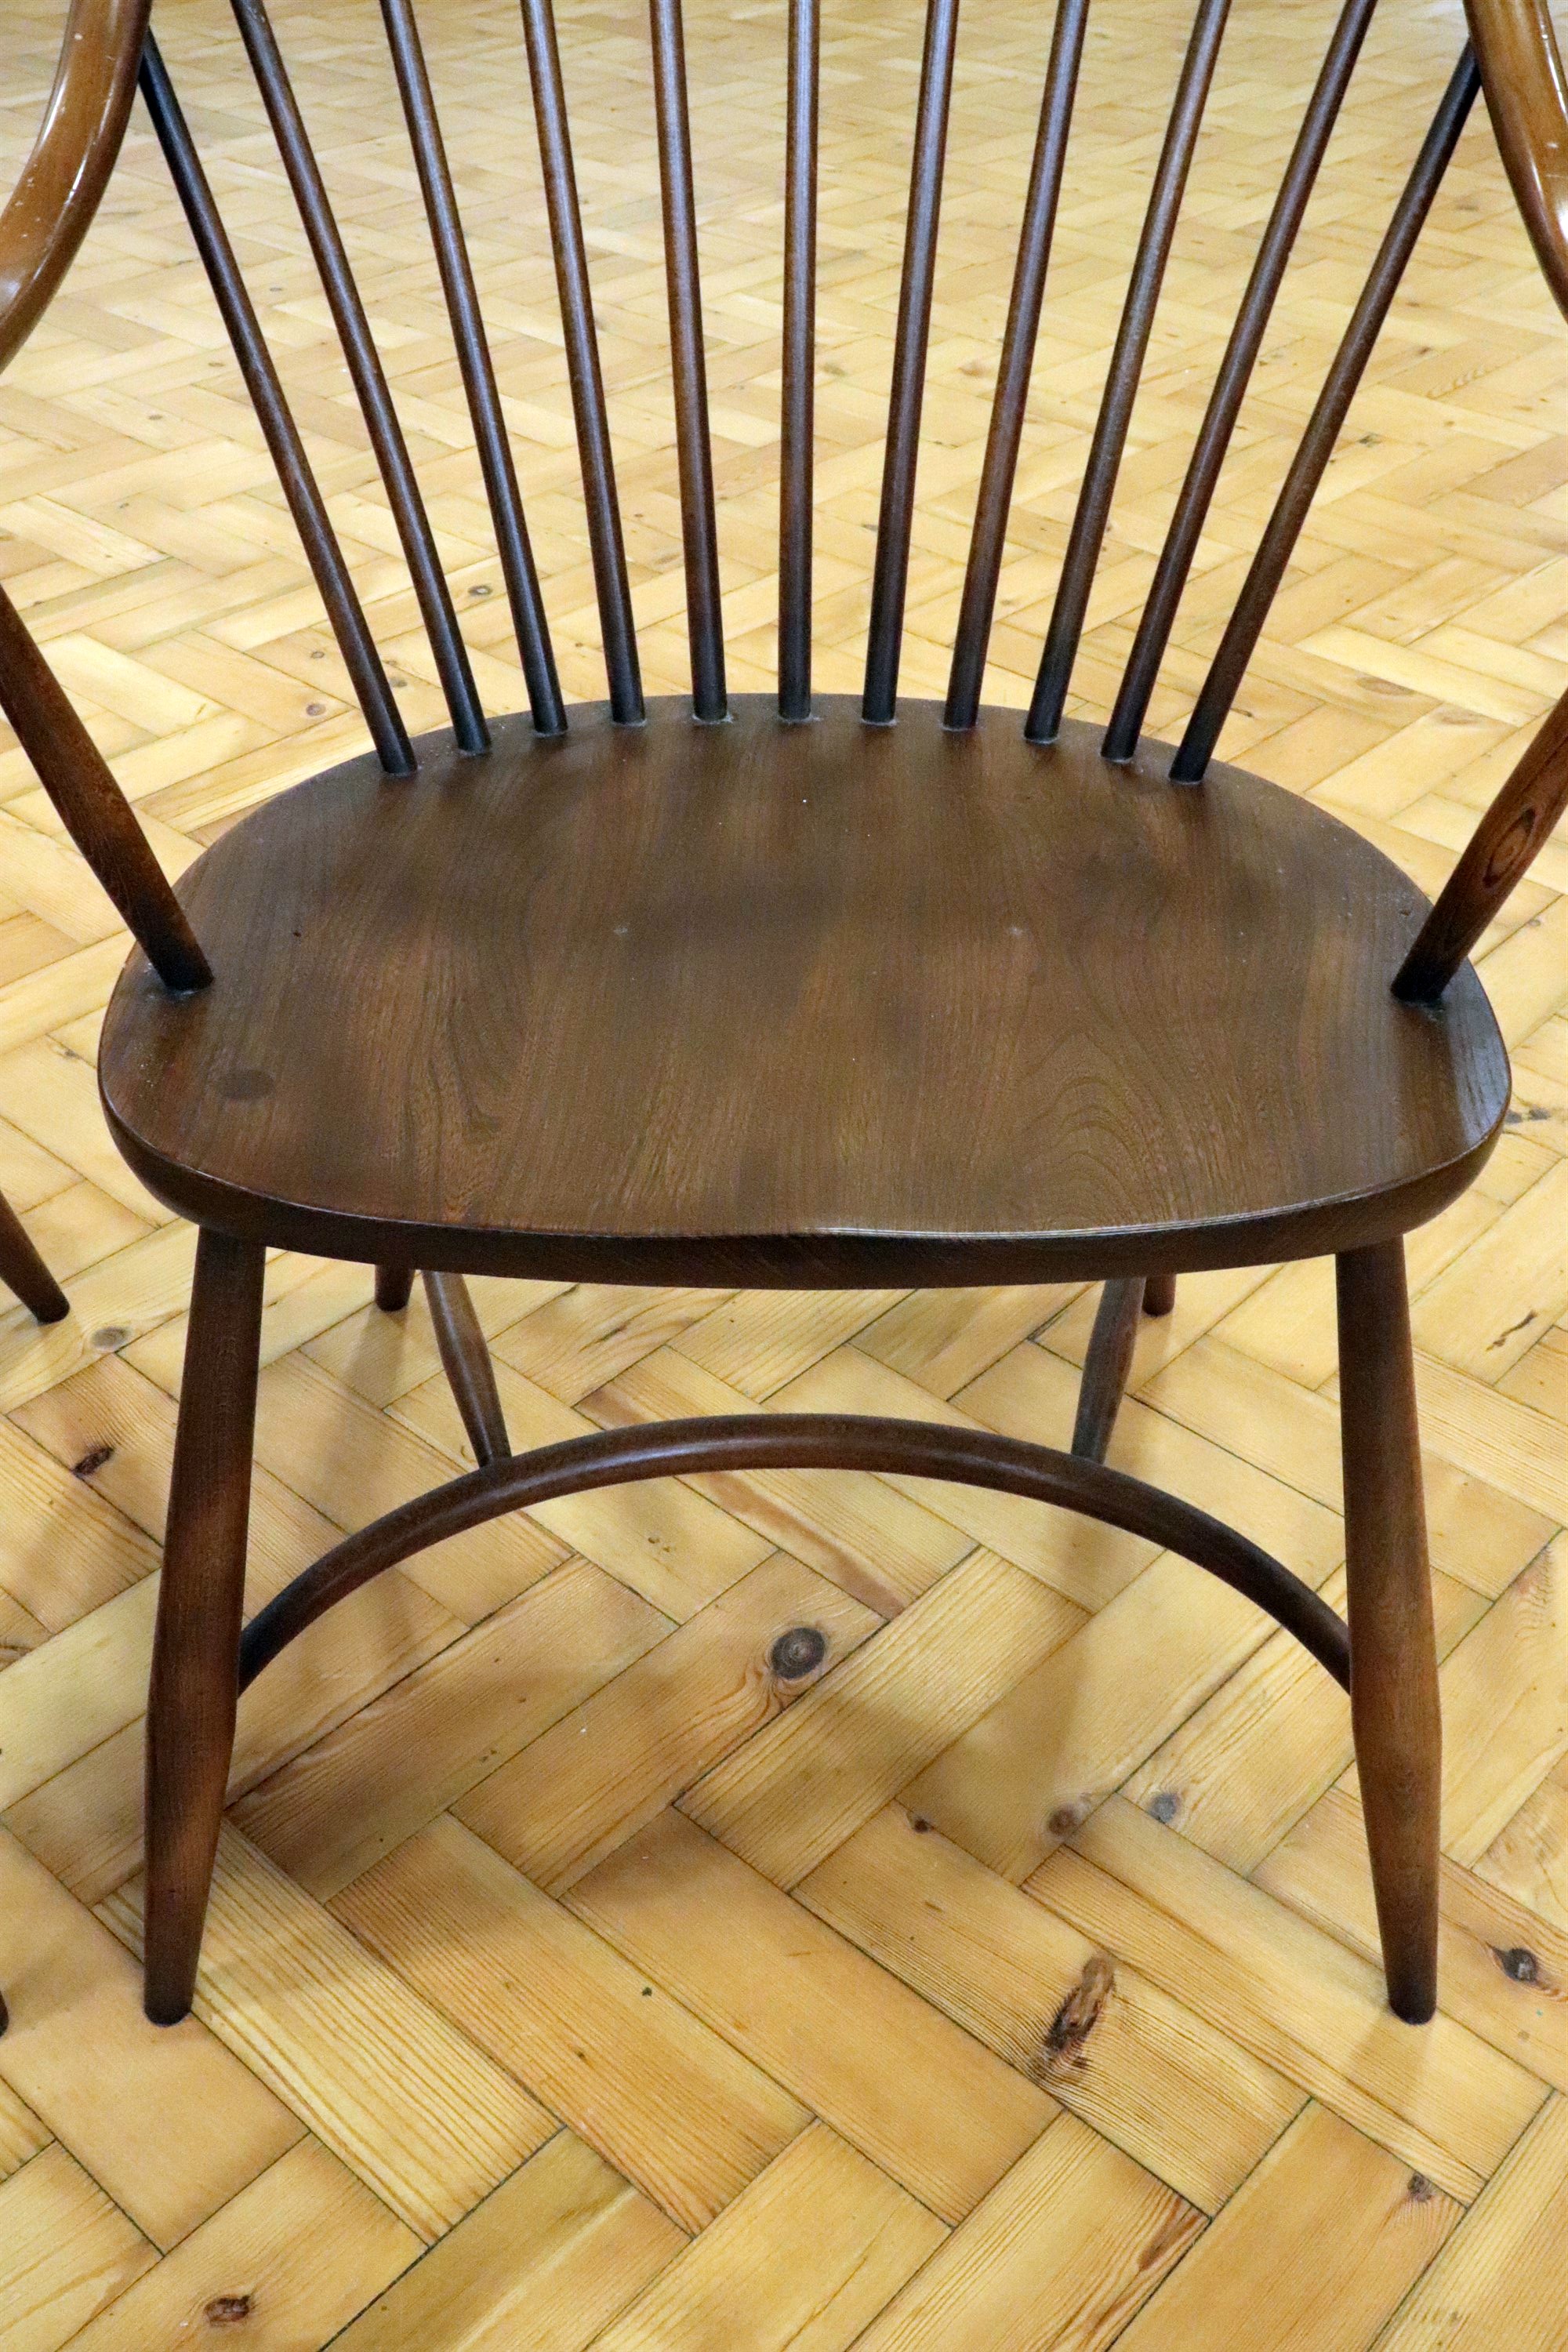 A pair of Ercol armchairs, Latimer or similar pattern with crinoline stretchers - Image 2 of 2